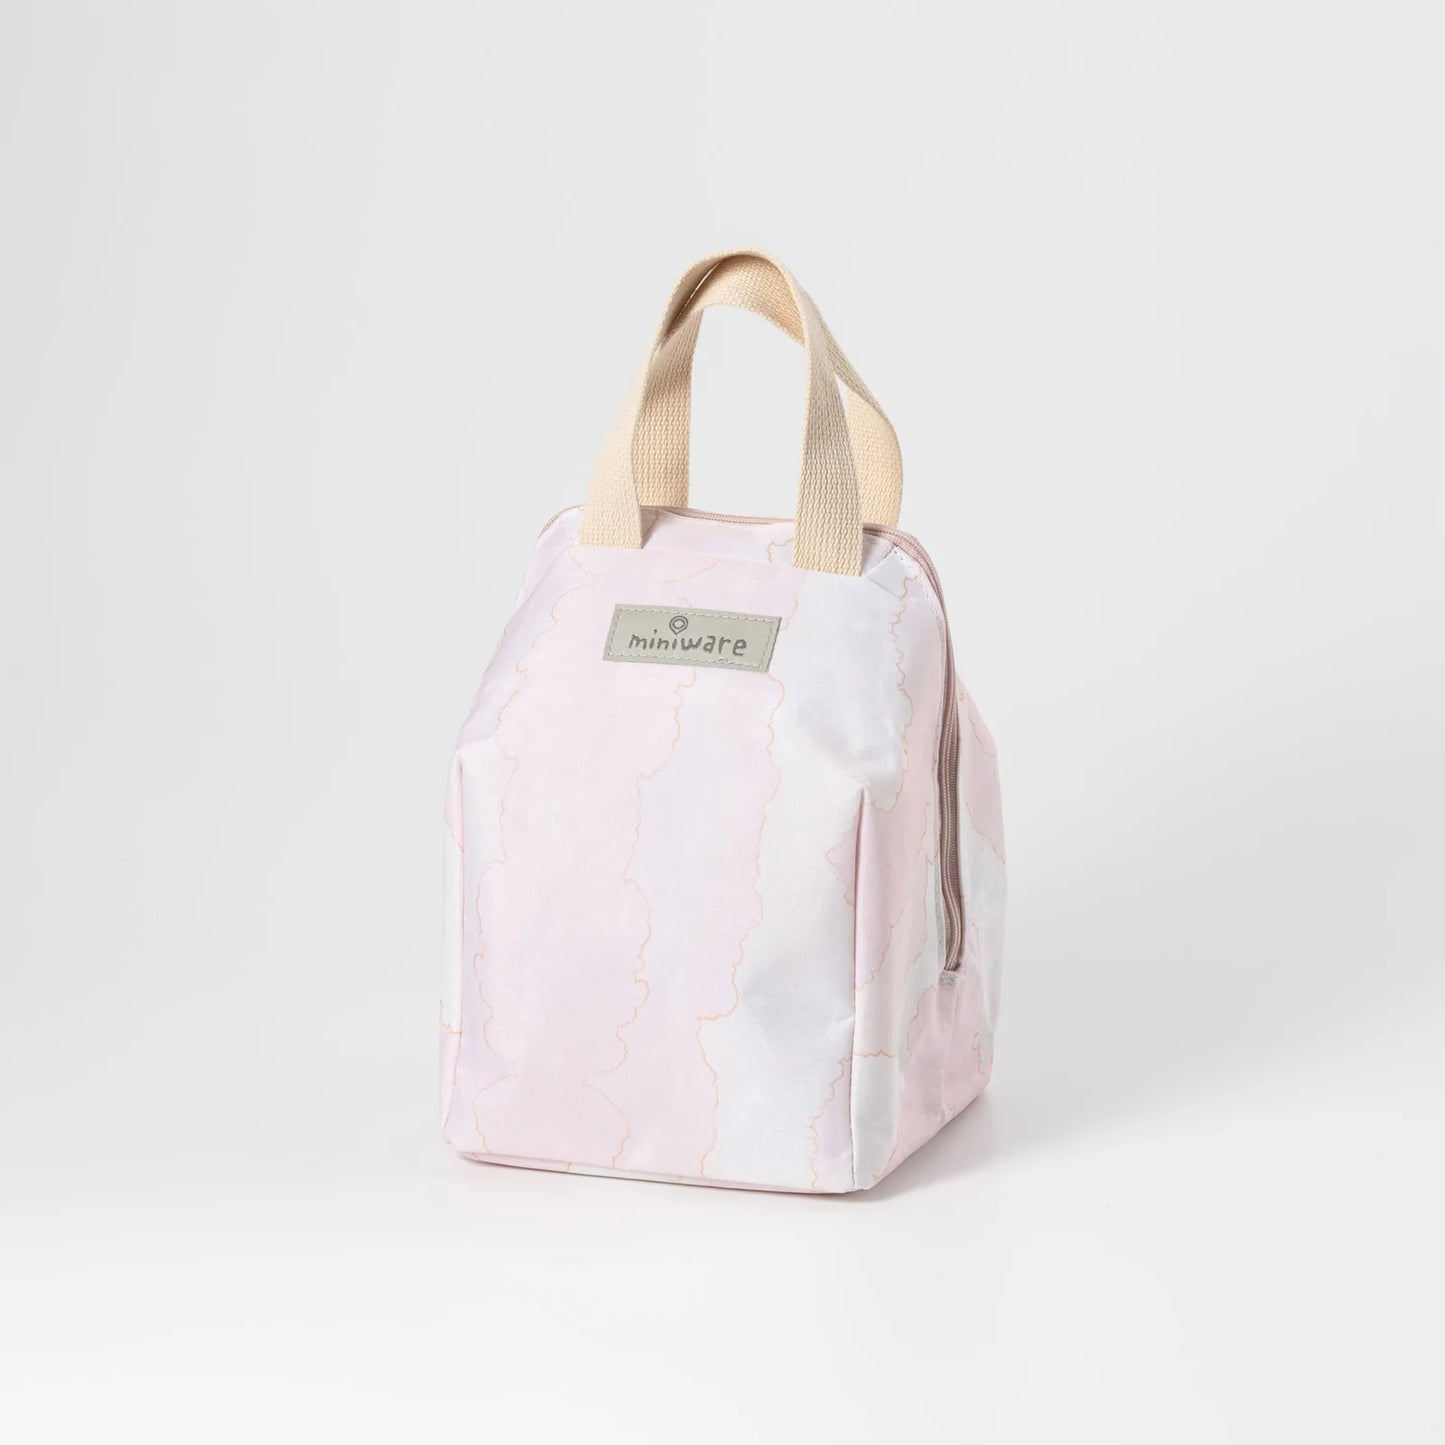 Meal Tote - Tragetasche (Pink Cloud)